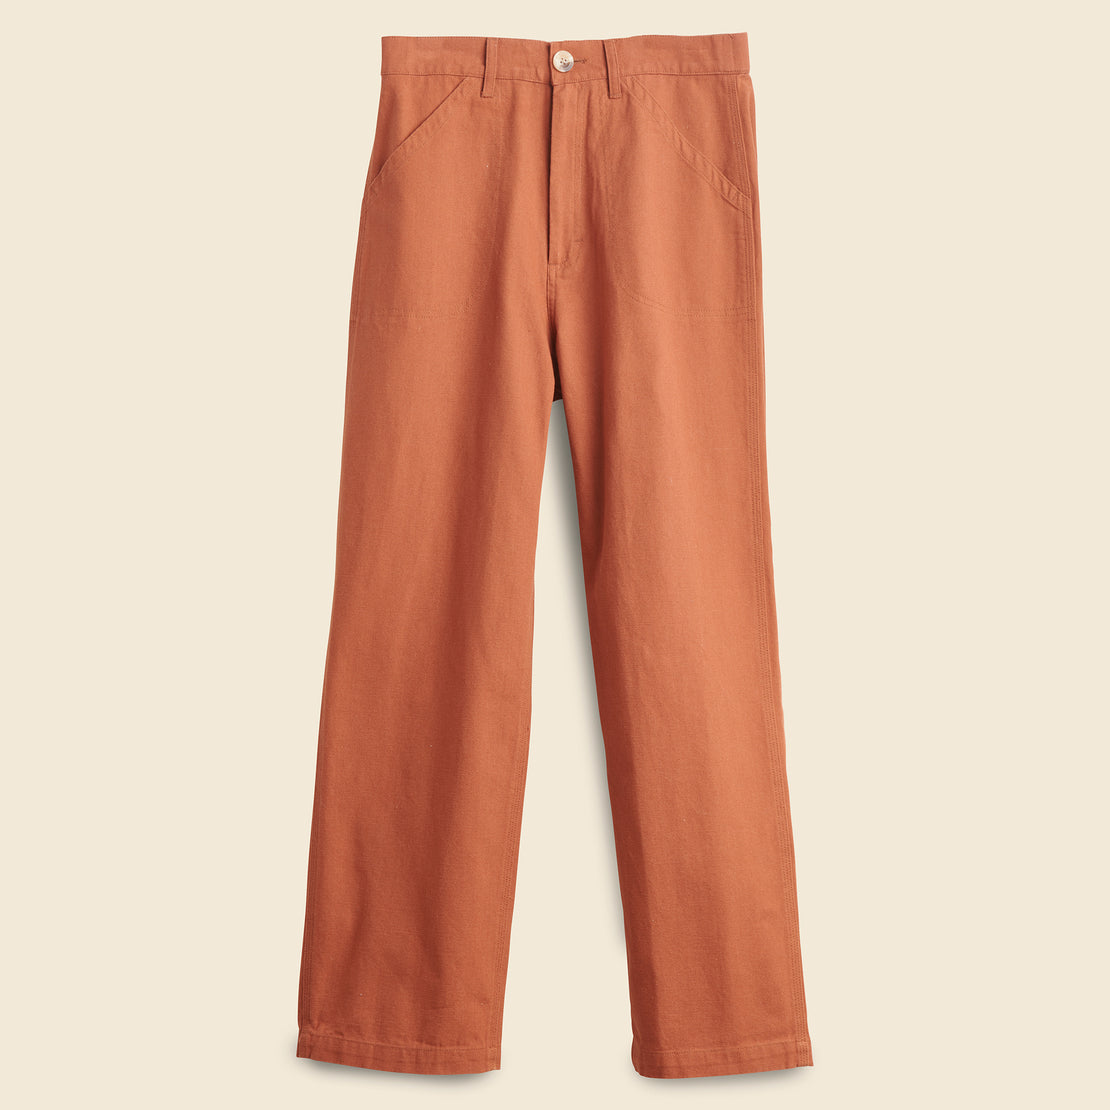 MOLLUSK Canvas Work Pants (Rover Green)S